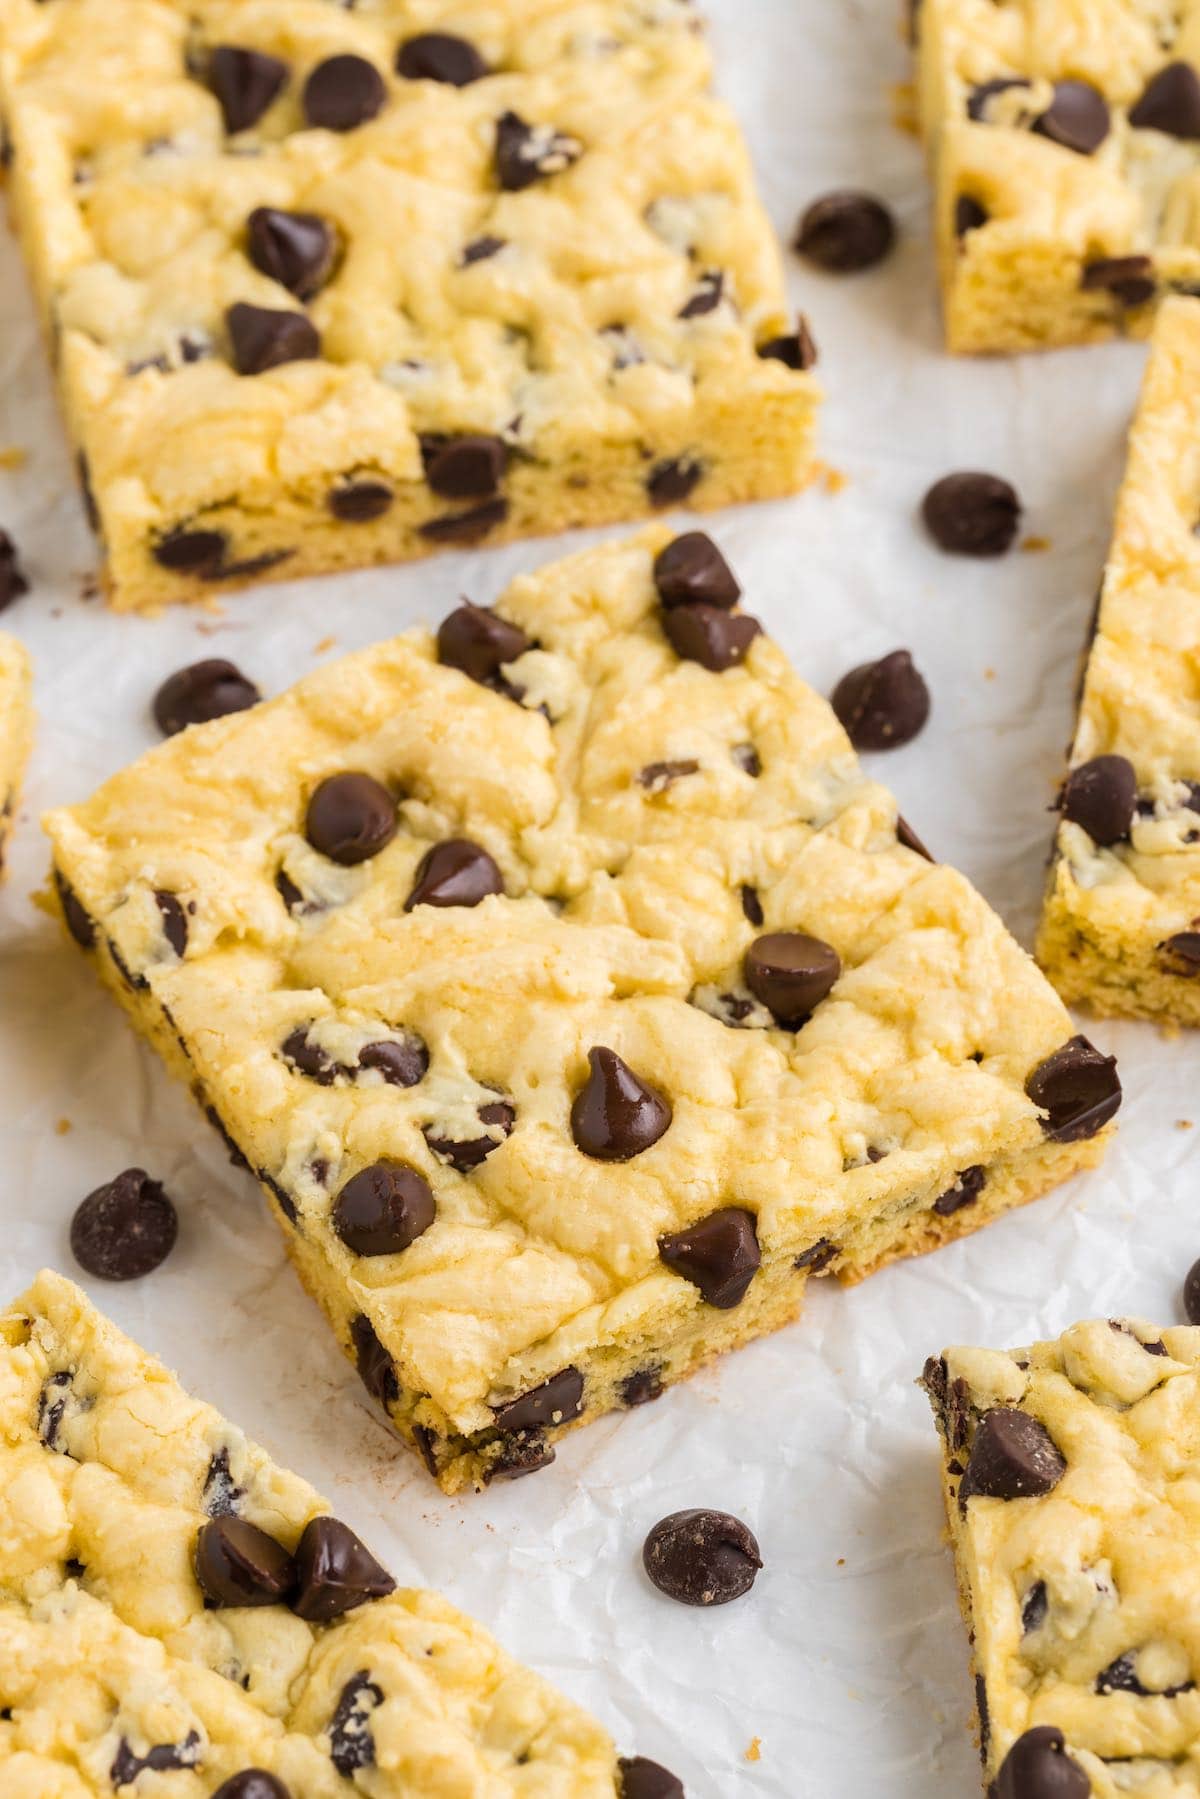 Cake Mix Chocolate Chip Cookie cut into bars.